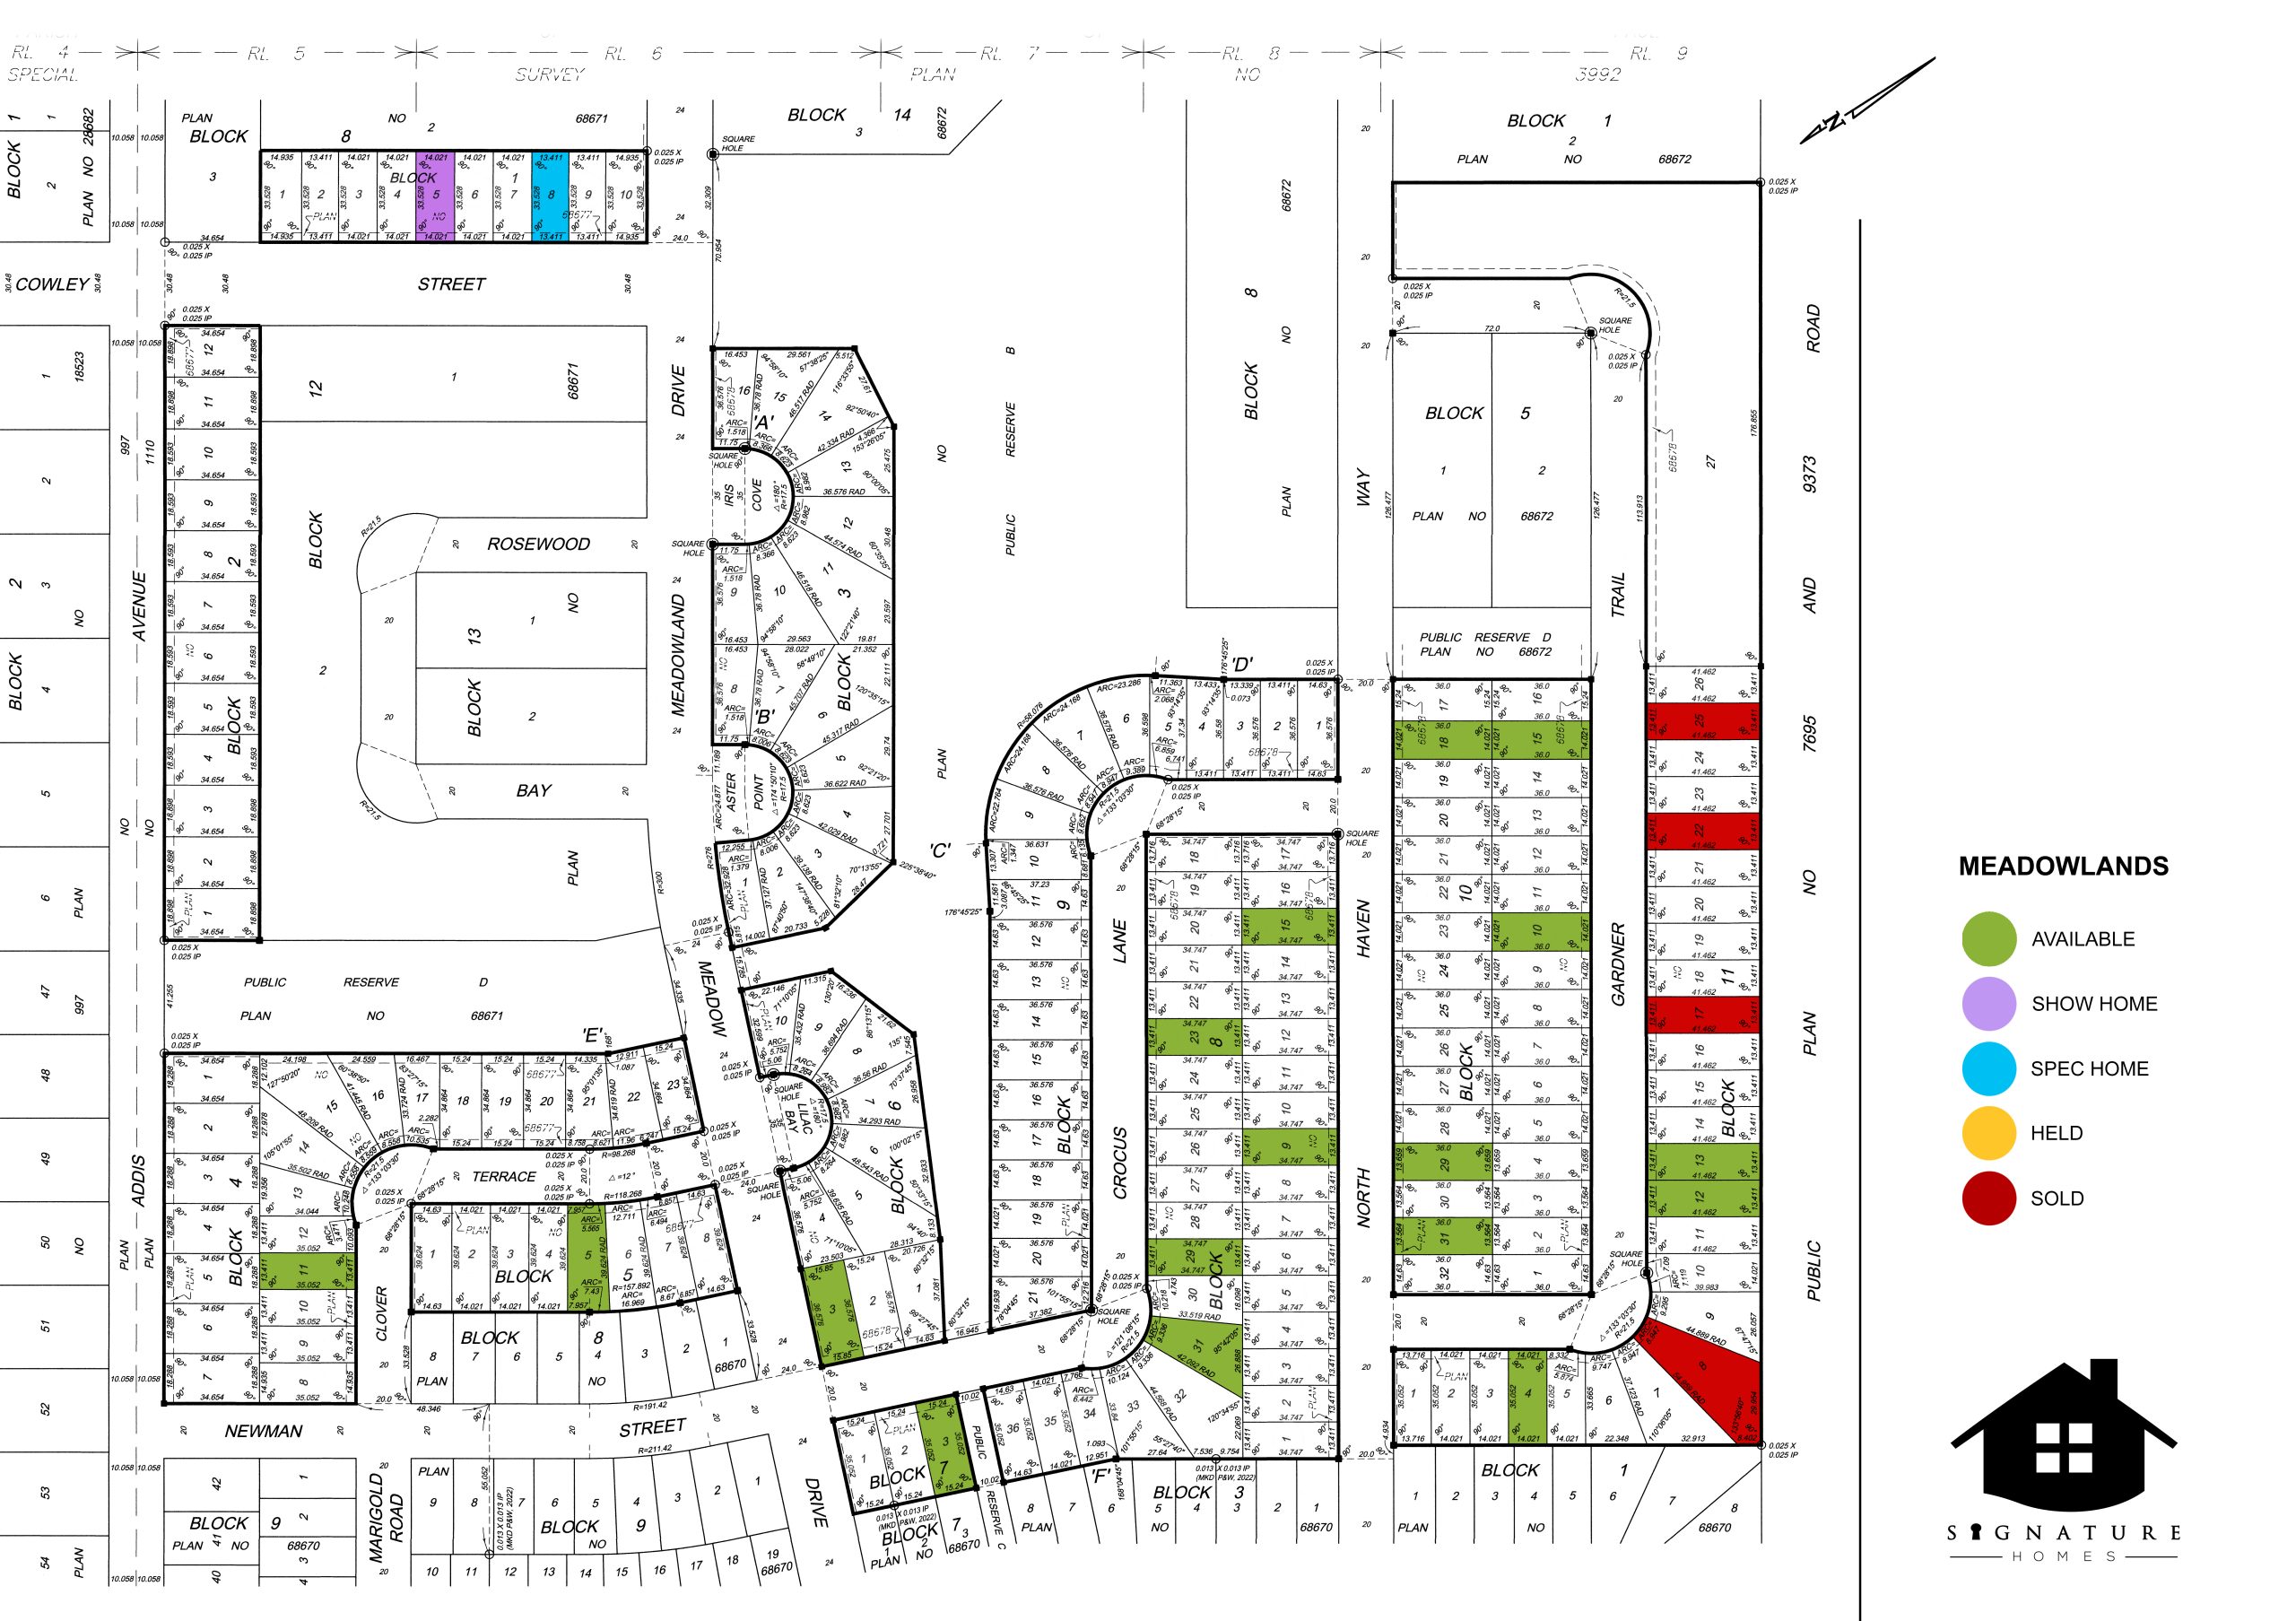 Map of Meadowlands Lot Selection